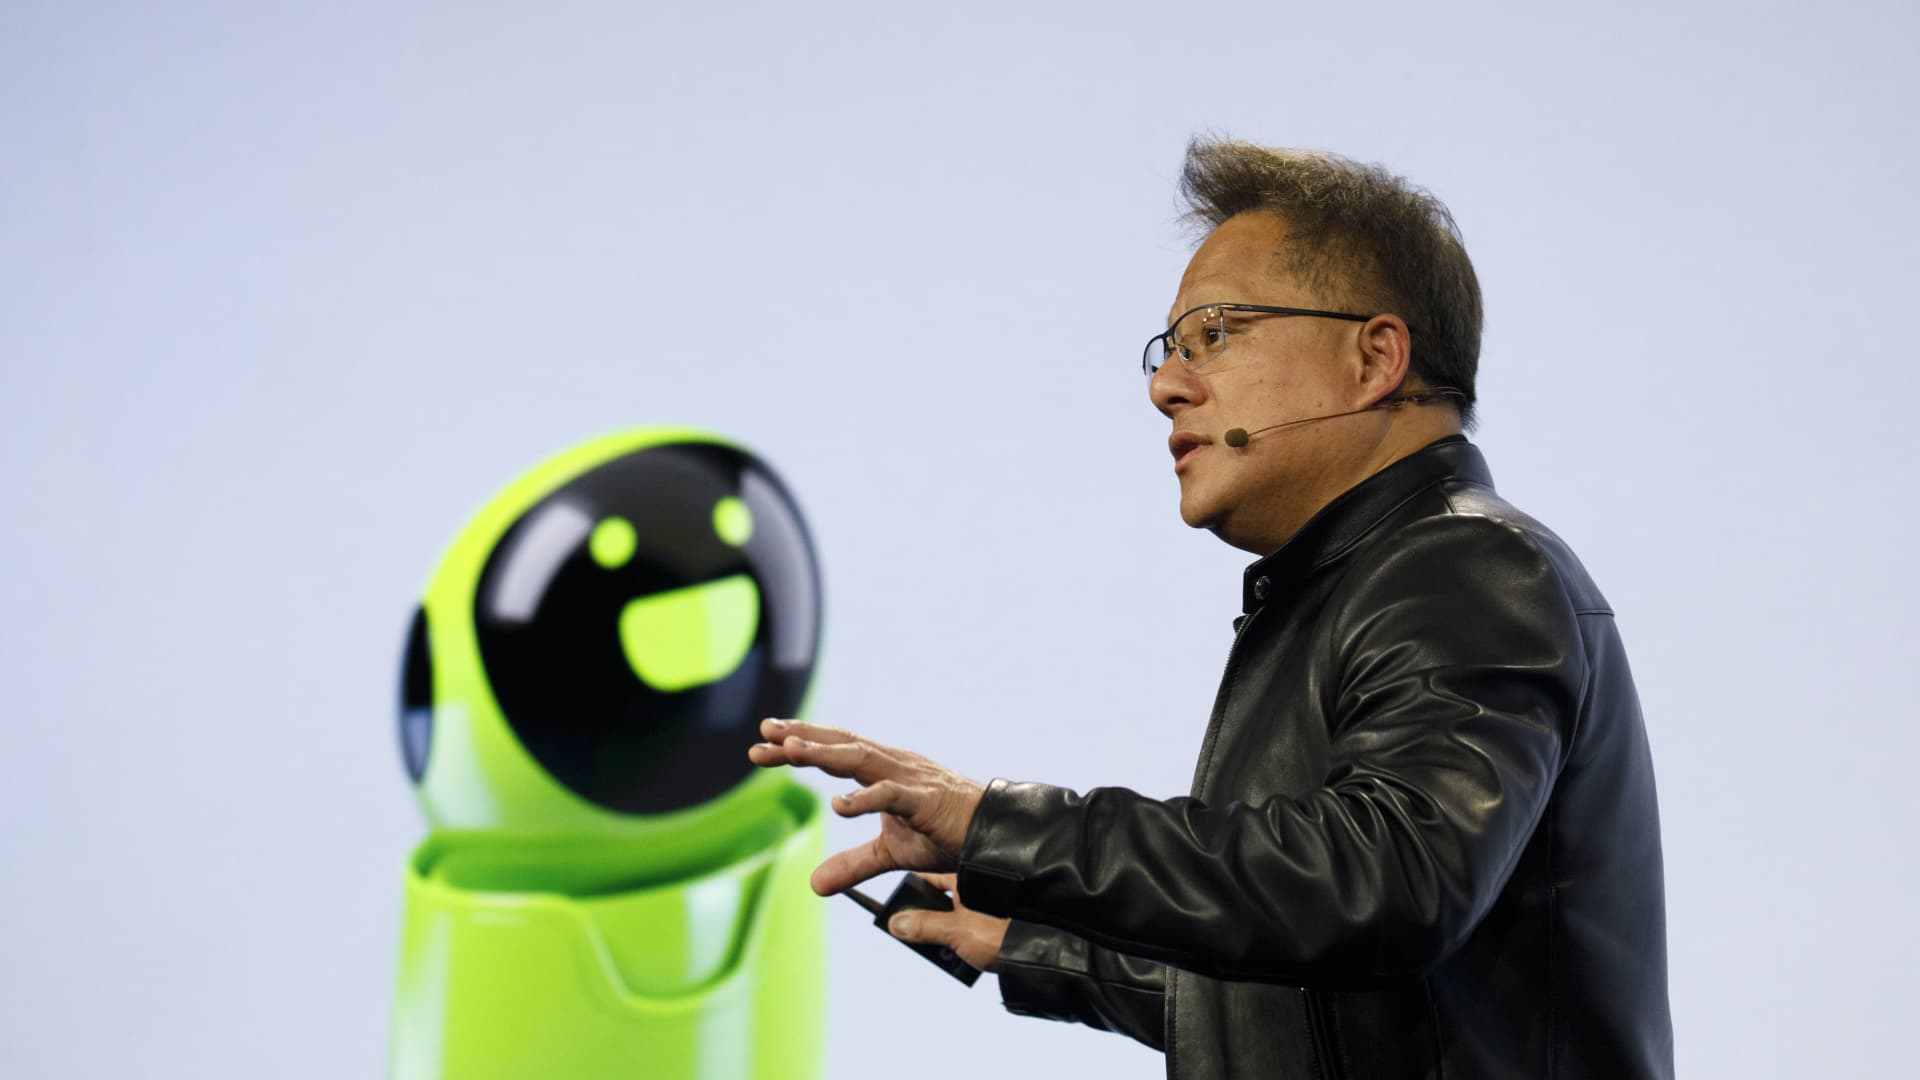 Nvidia shares up 7% on Morgan Stanley bullish comments on AI